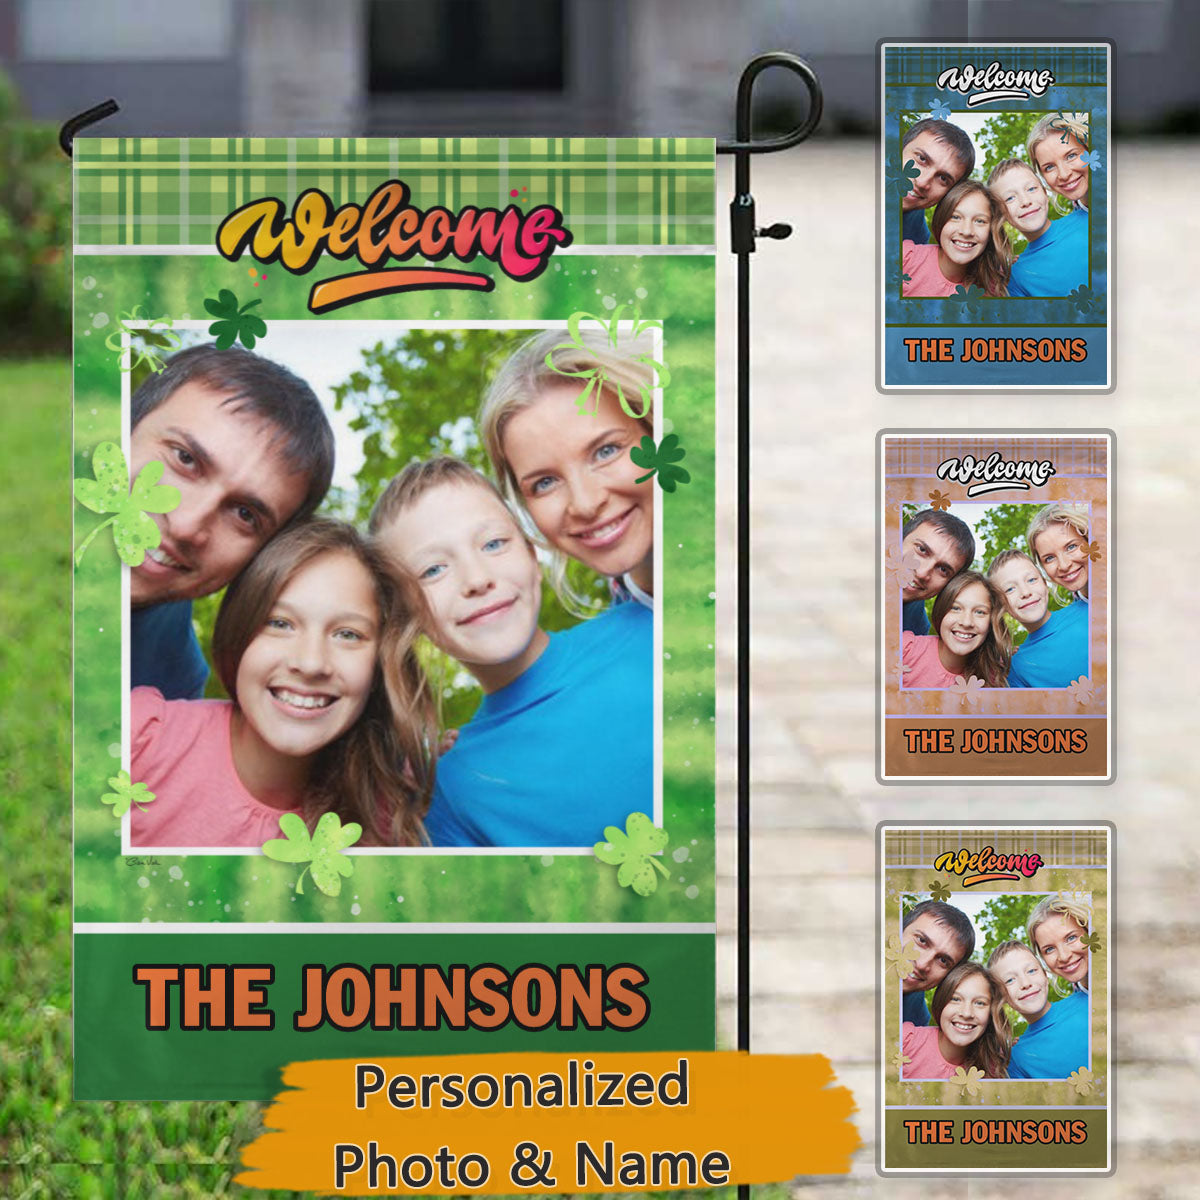 Get Lucky Welcome Personalized Photo & Family Name Garden & House Flag